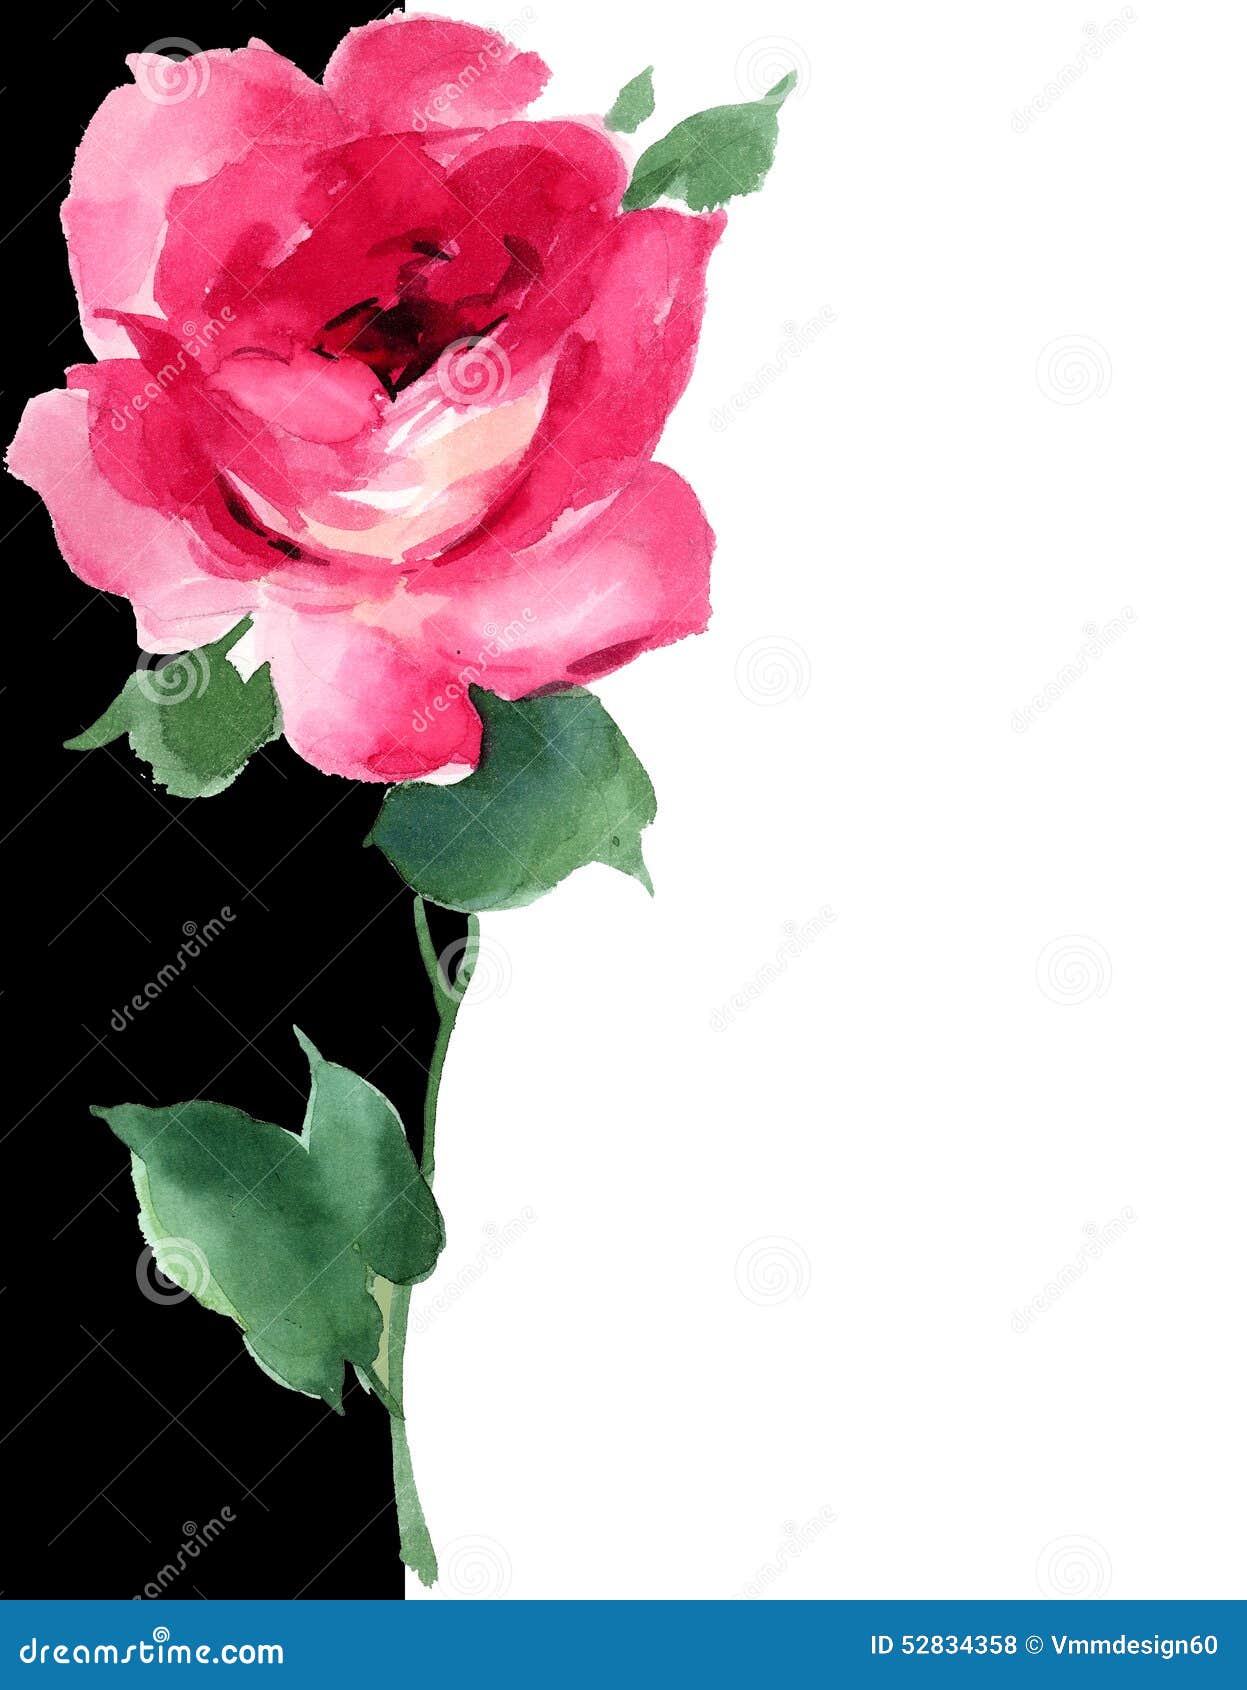 Black And Red Rose Art